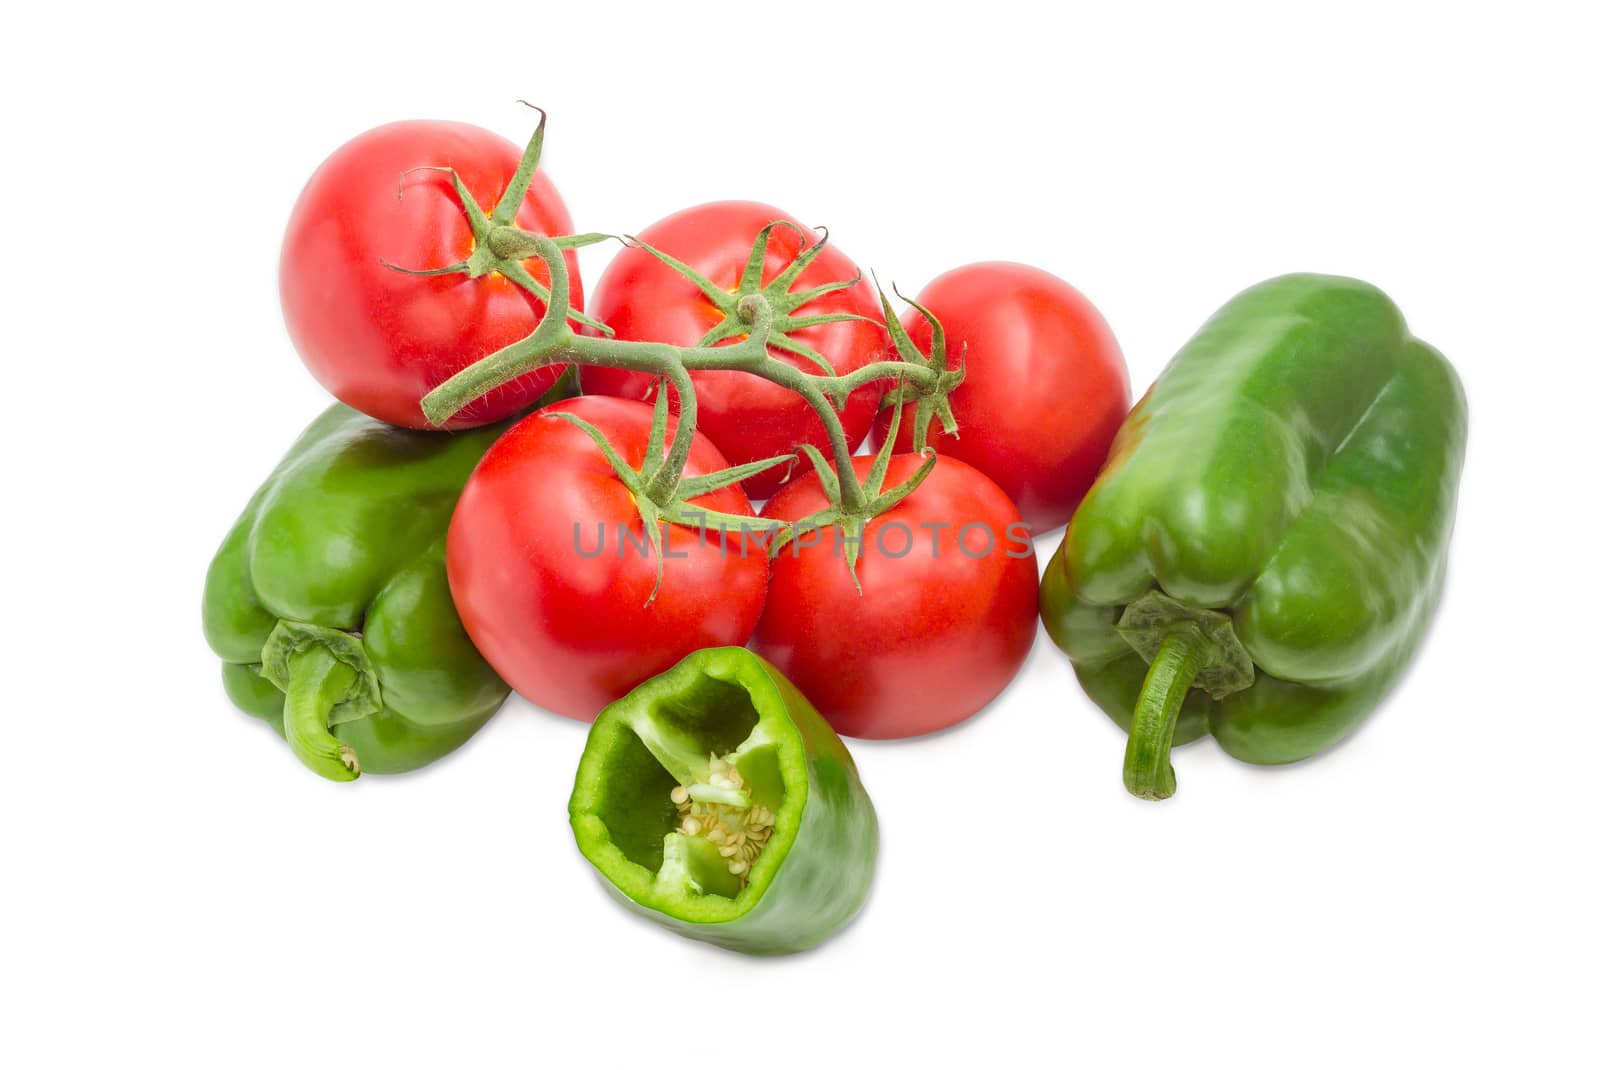 Branch of the ripe red tomatoes and green bell peppers by anmbph